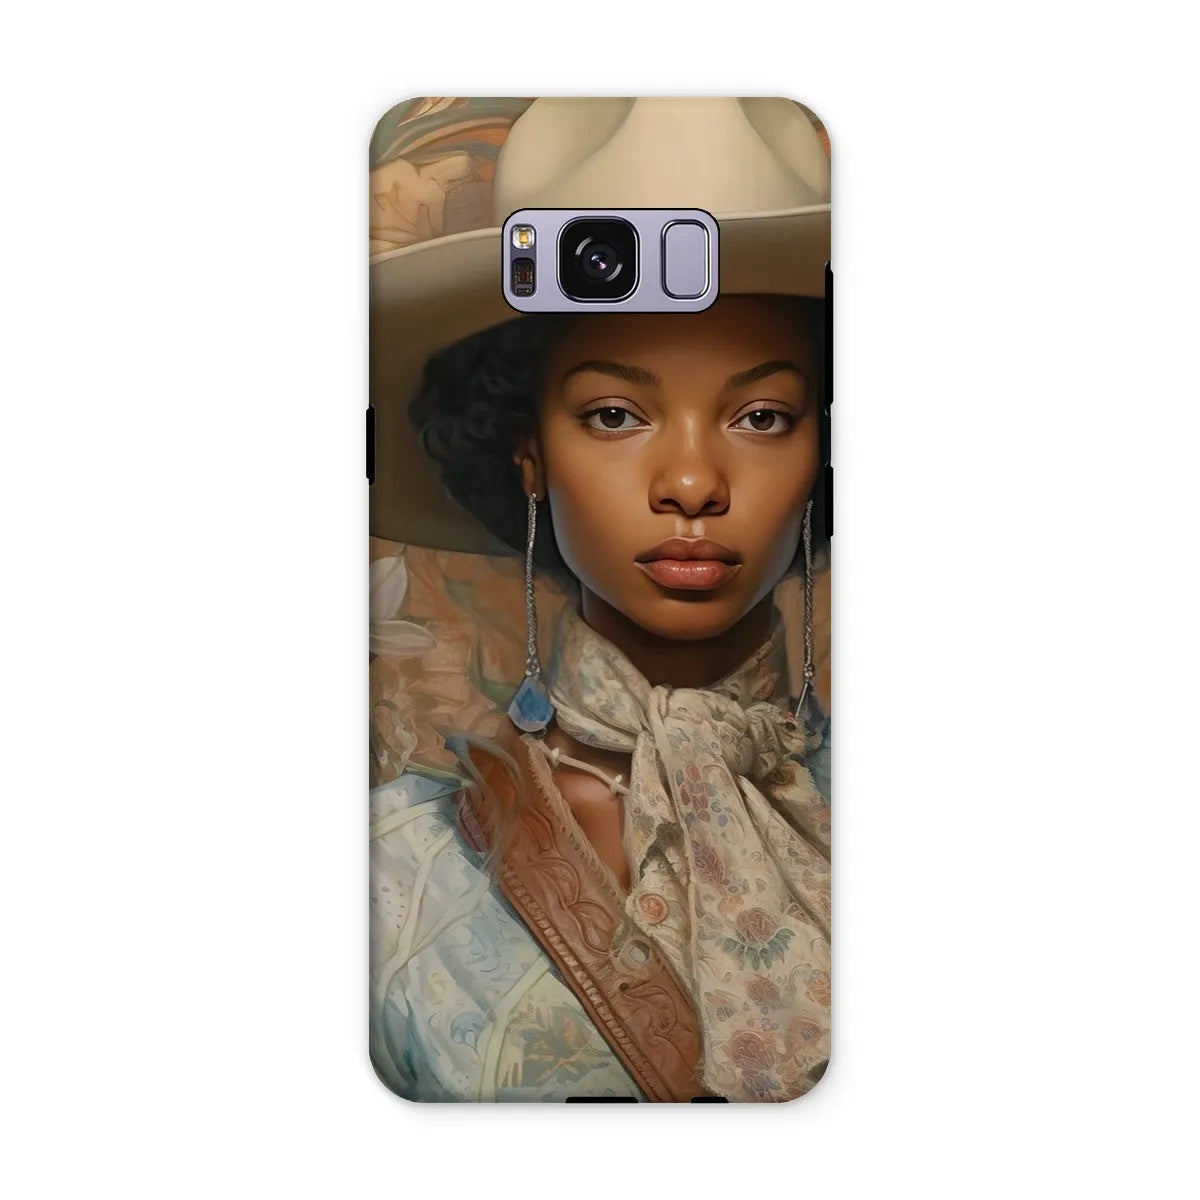 Imani The Lesbian Cowgirl - Sapphic Art Phone Case - Samsung Galaxy S8 Plus / Matte - Mobile Phone Cases - Aesthetic Art